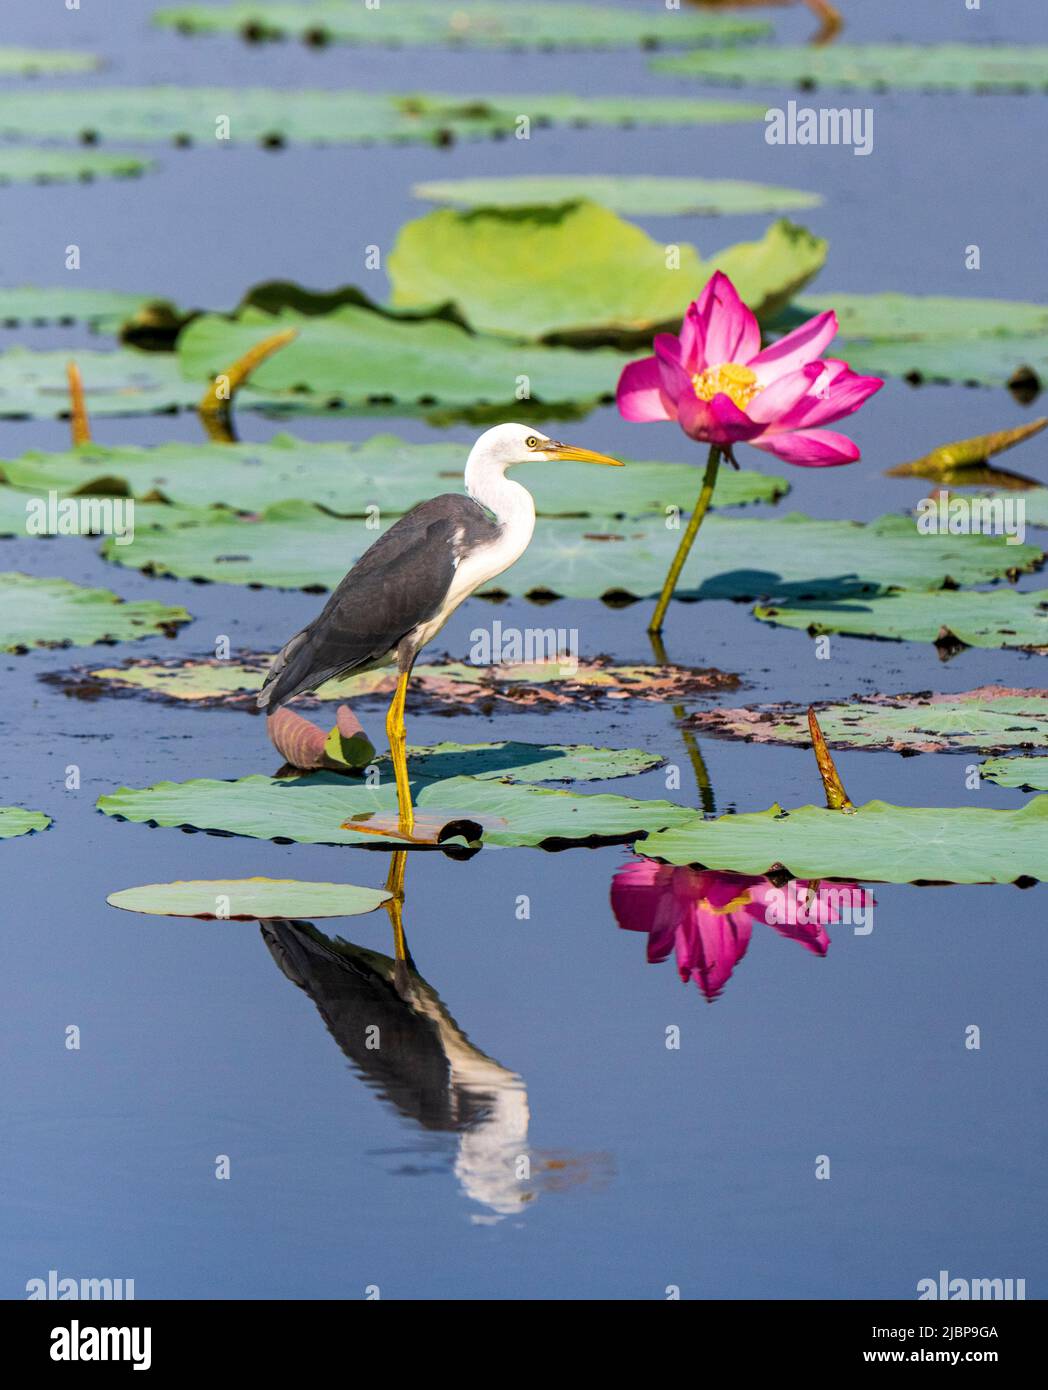 Immature Pied Heron (Ardea picata) standing in front of a pink Lotus flower, Fogg Dam, near Darwin, Northern Territory, NT, Australia Stock Photo